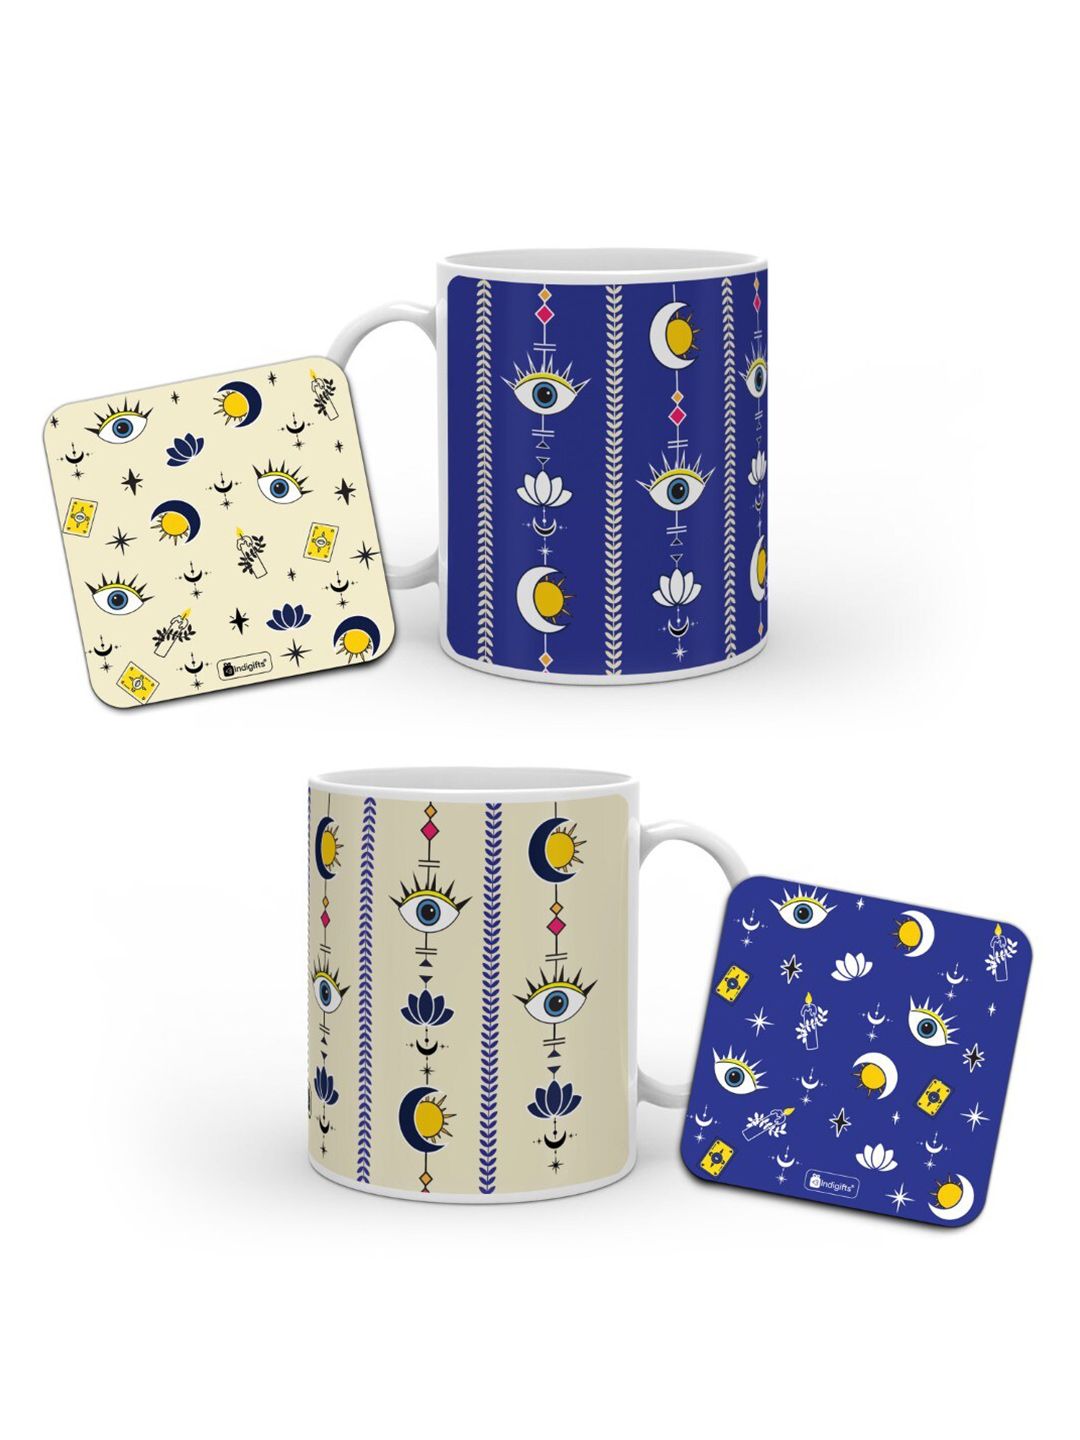 Indigifts 4 Pieces Blue & Beige Printed Ceramic Glossy Mugs & Coster Set Price in India